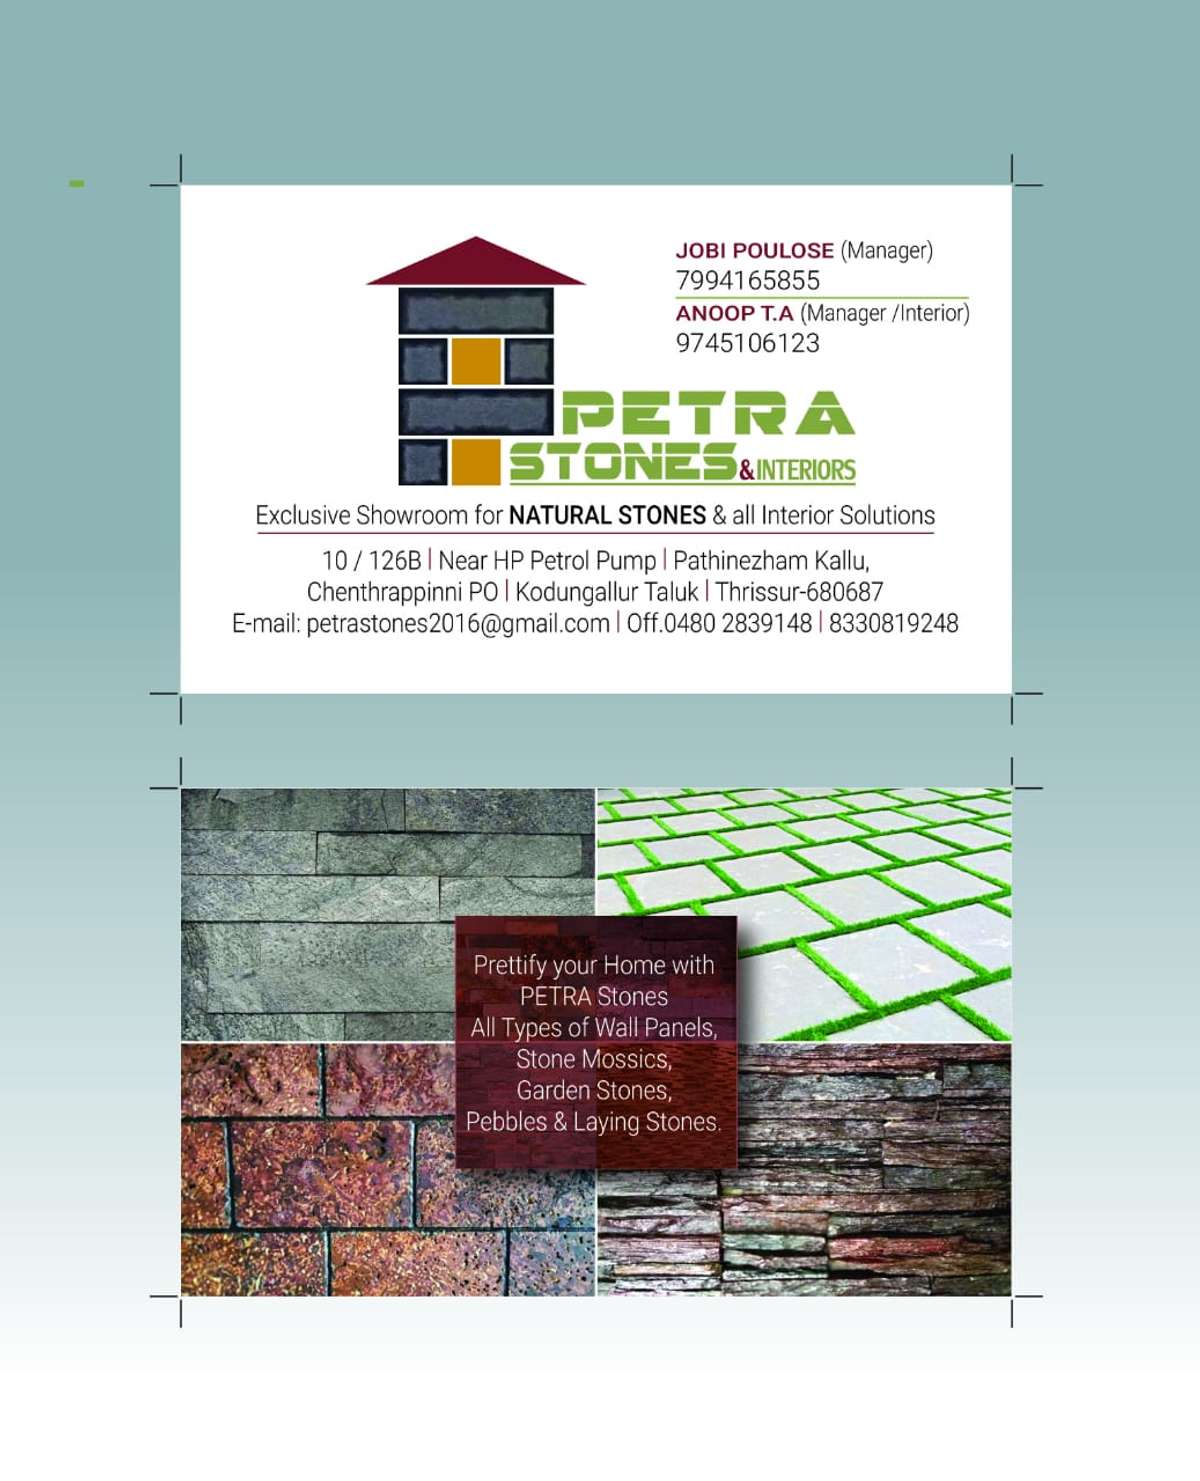 for all interior and exterior natural stone solutions from Petra stones, chentrappinni